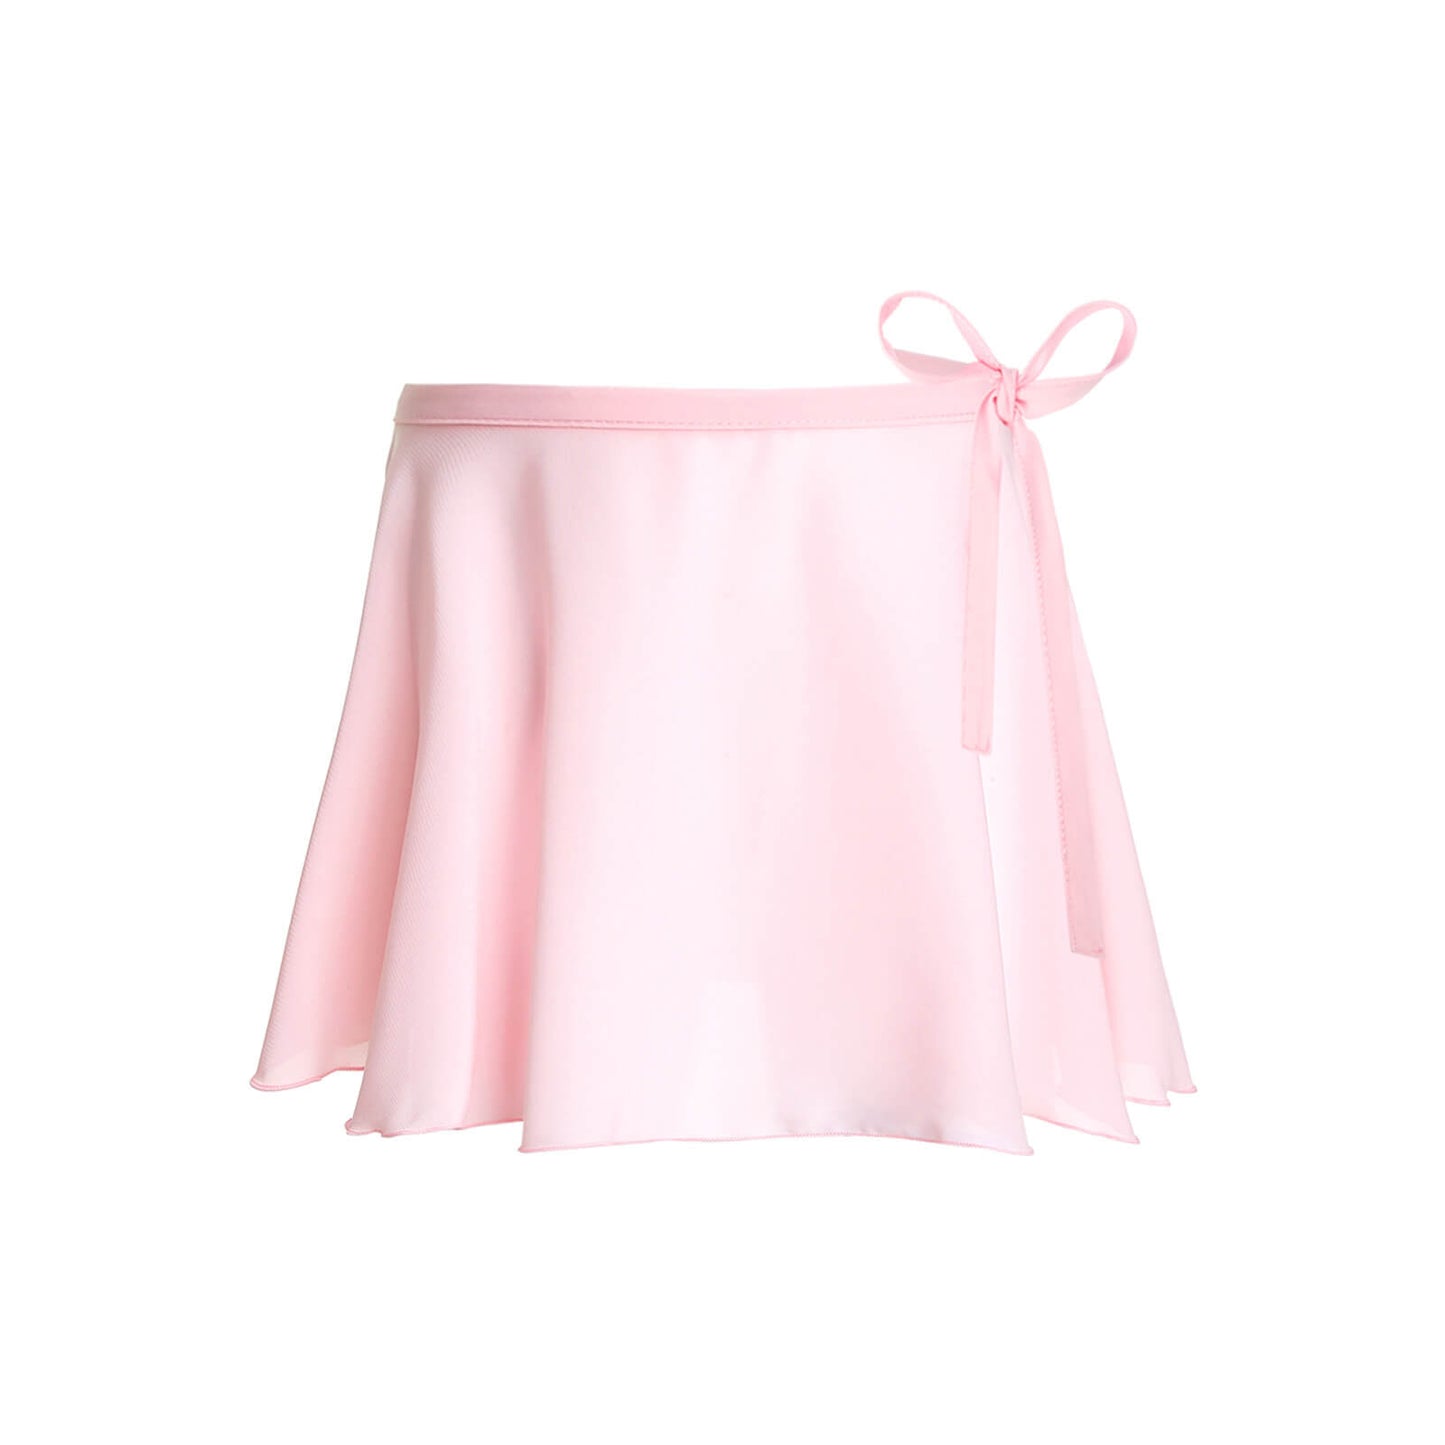 Pink Lace Up Ballet Dance Skirts